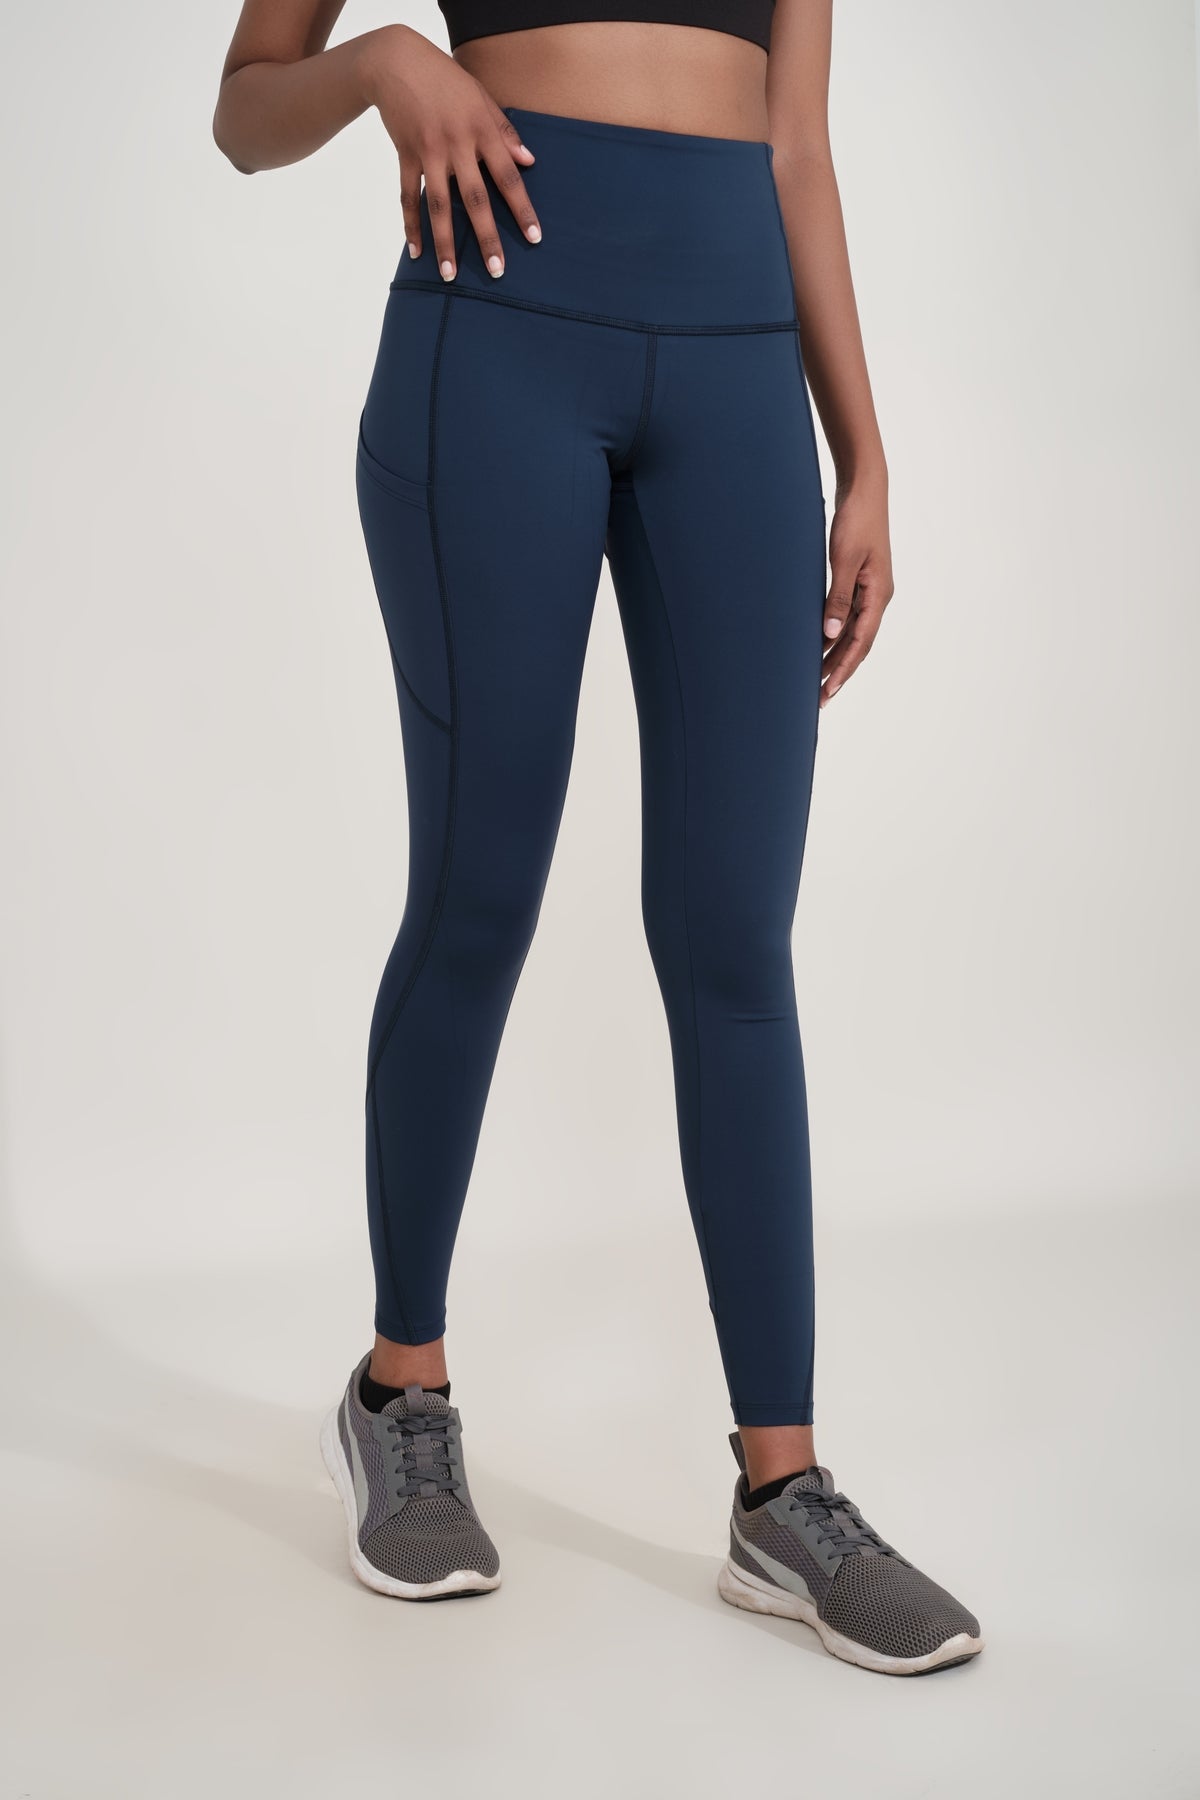 Amante Womens Sports Full Length Tight